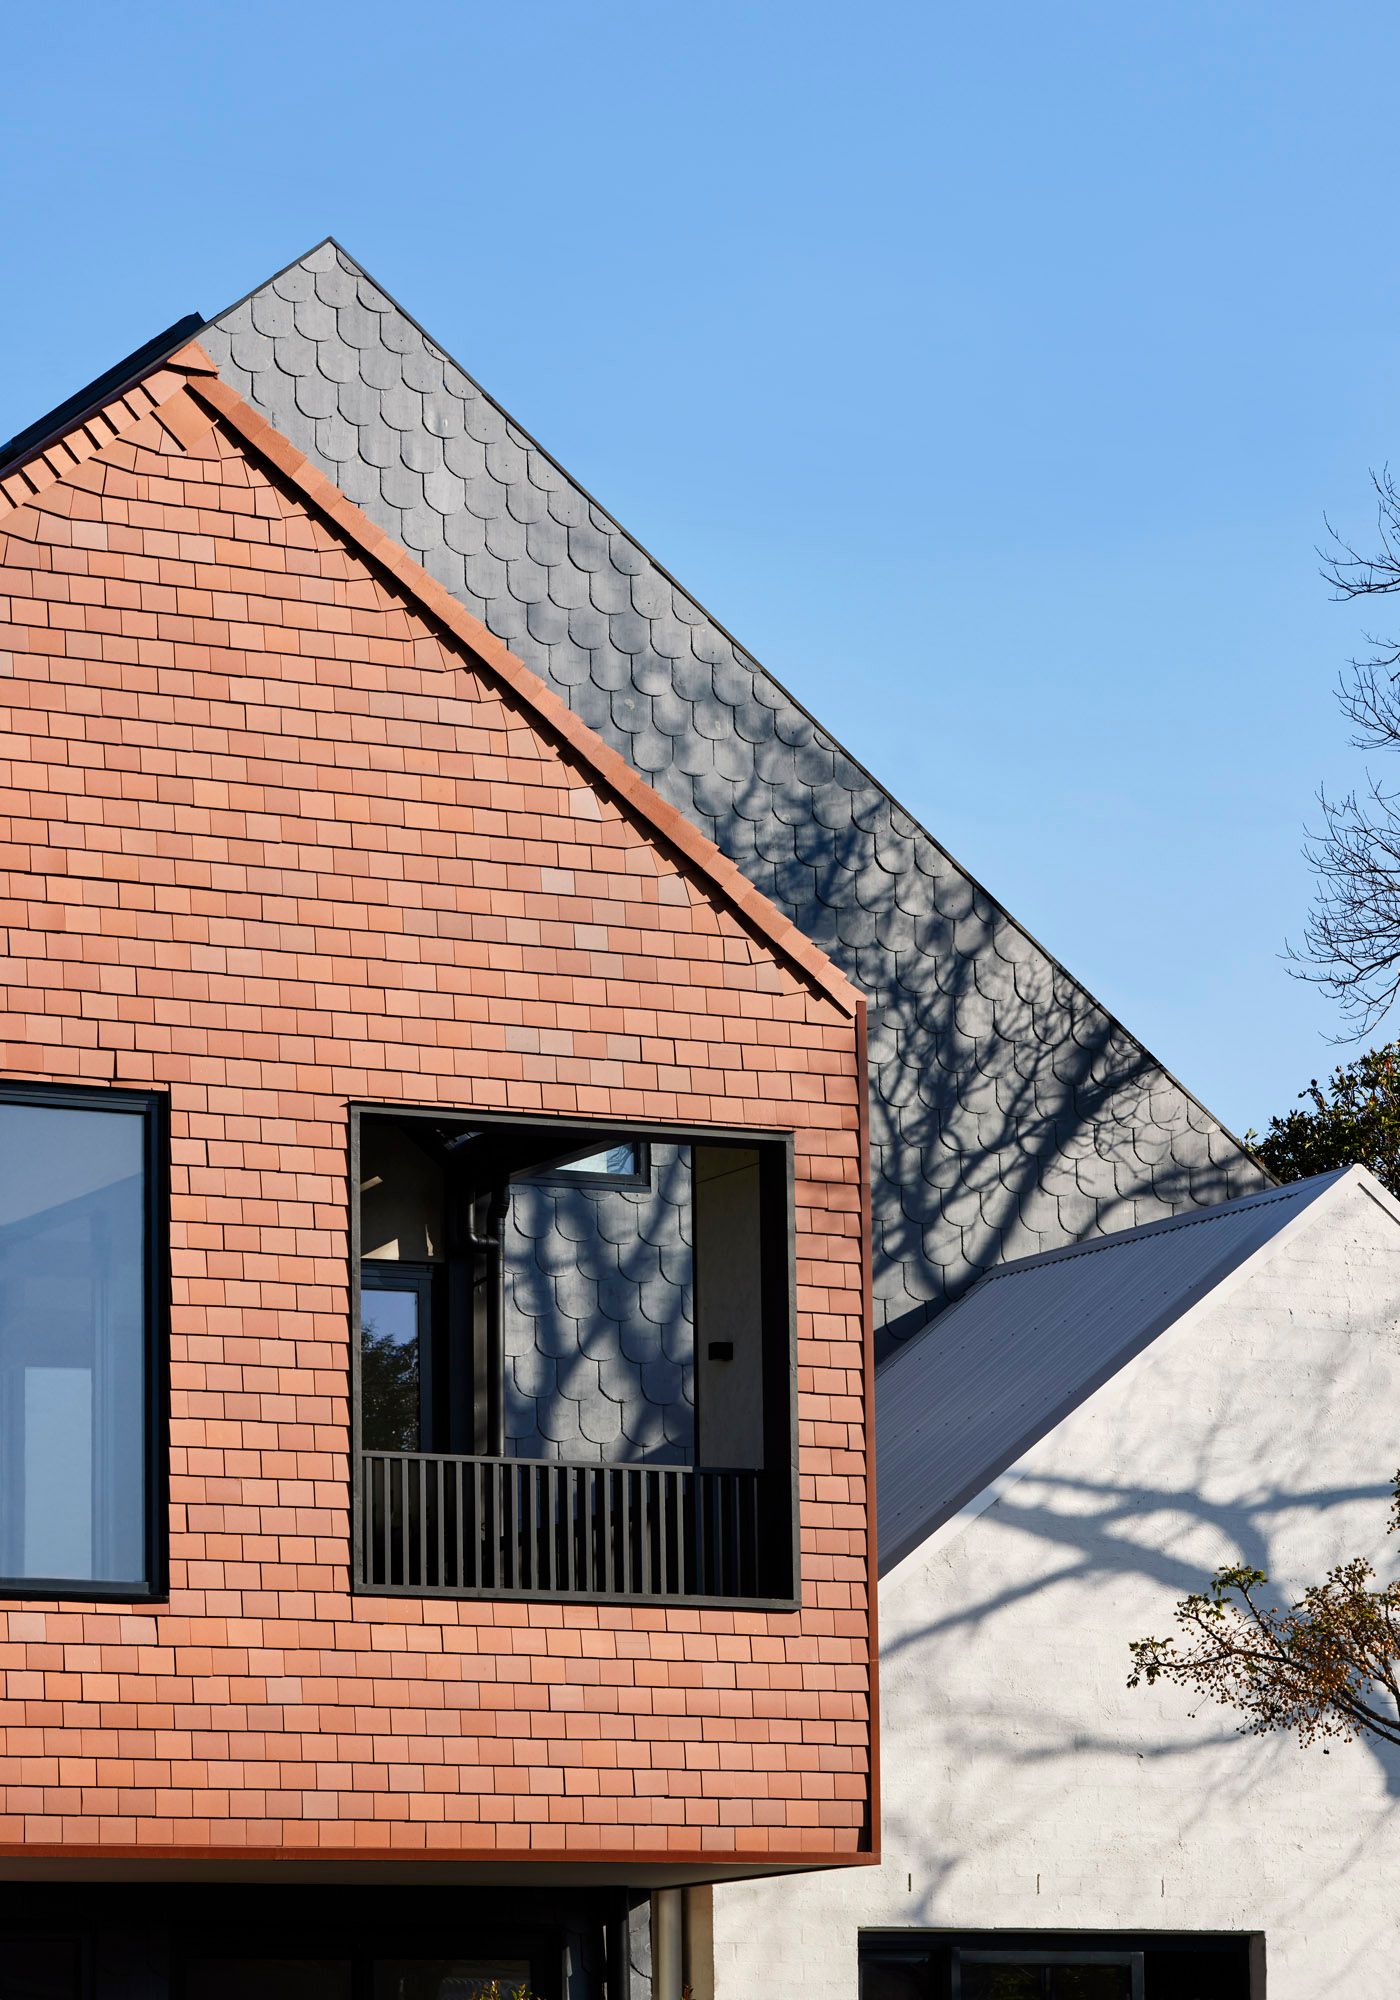 Slate House by Austin Maynard Architects. Exterior facade view, detailing terracotta wall cladding and clay roof tiles